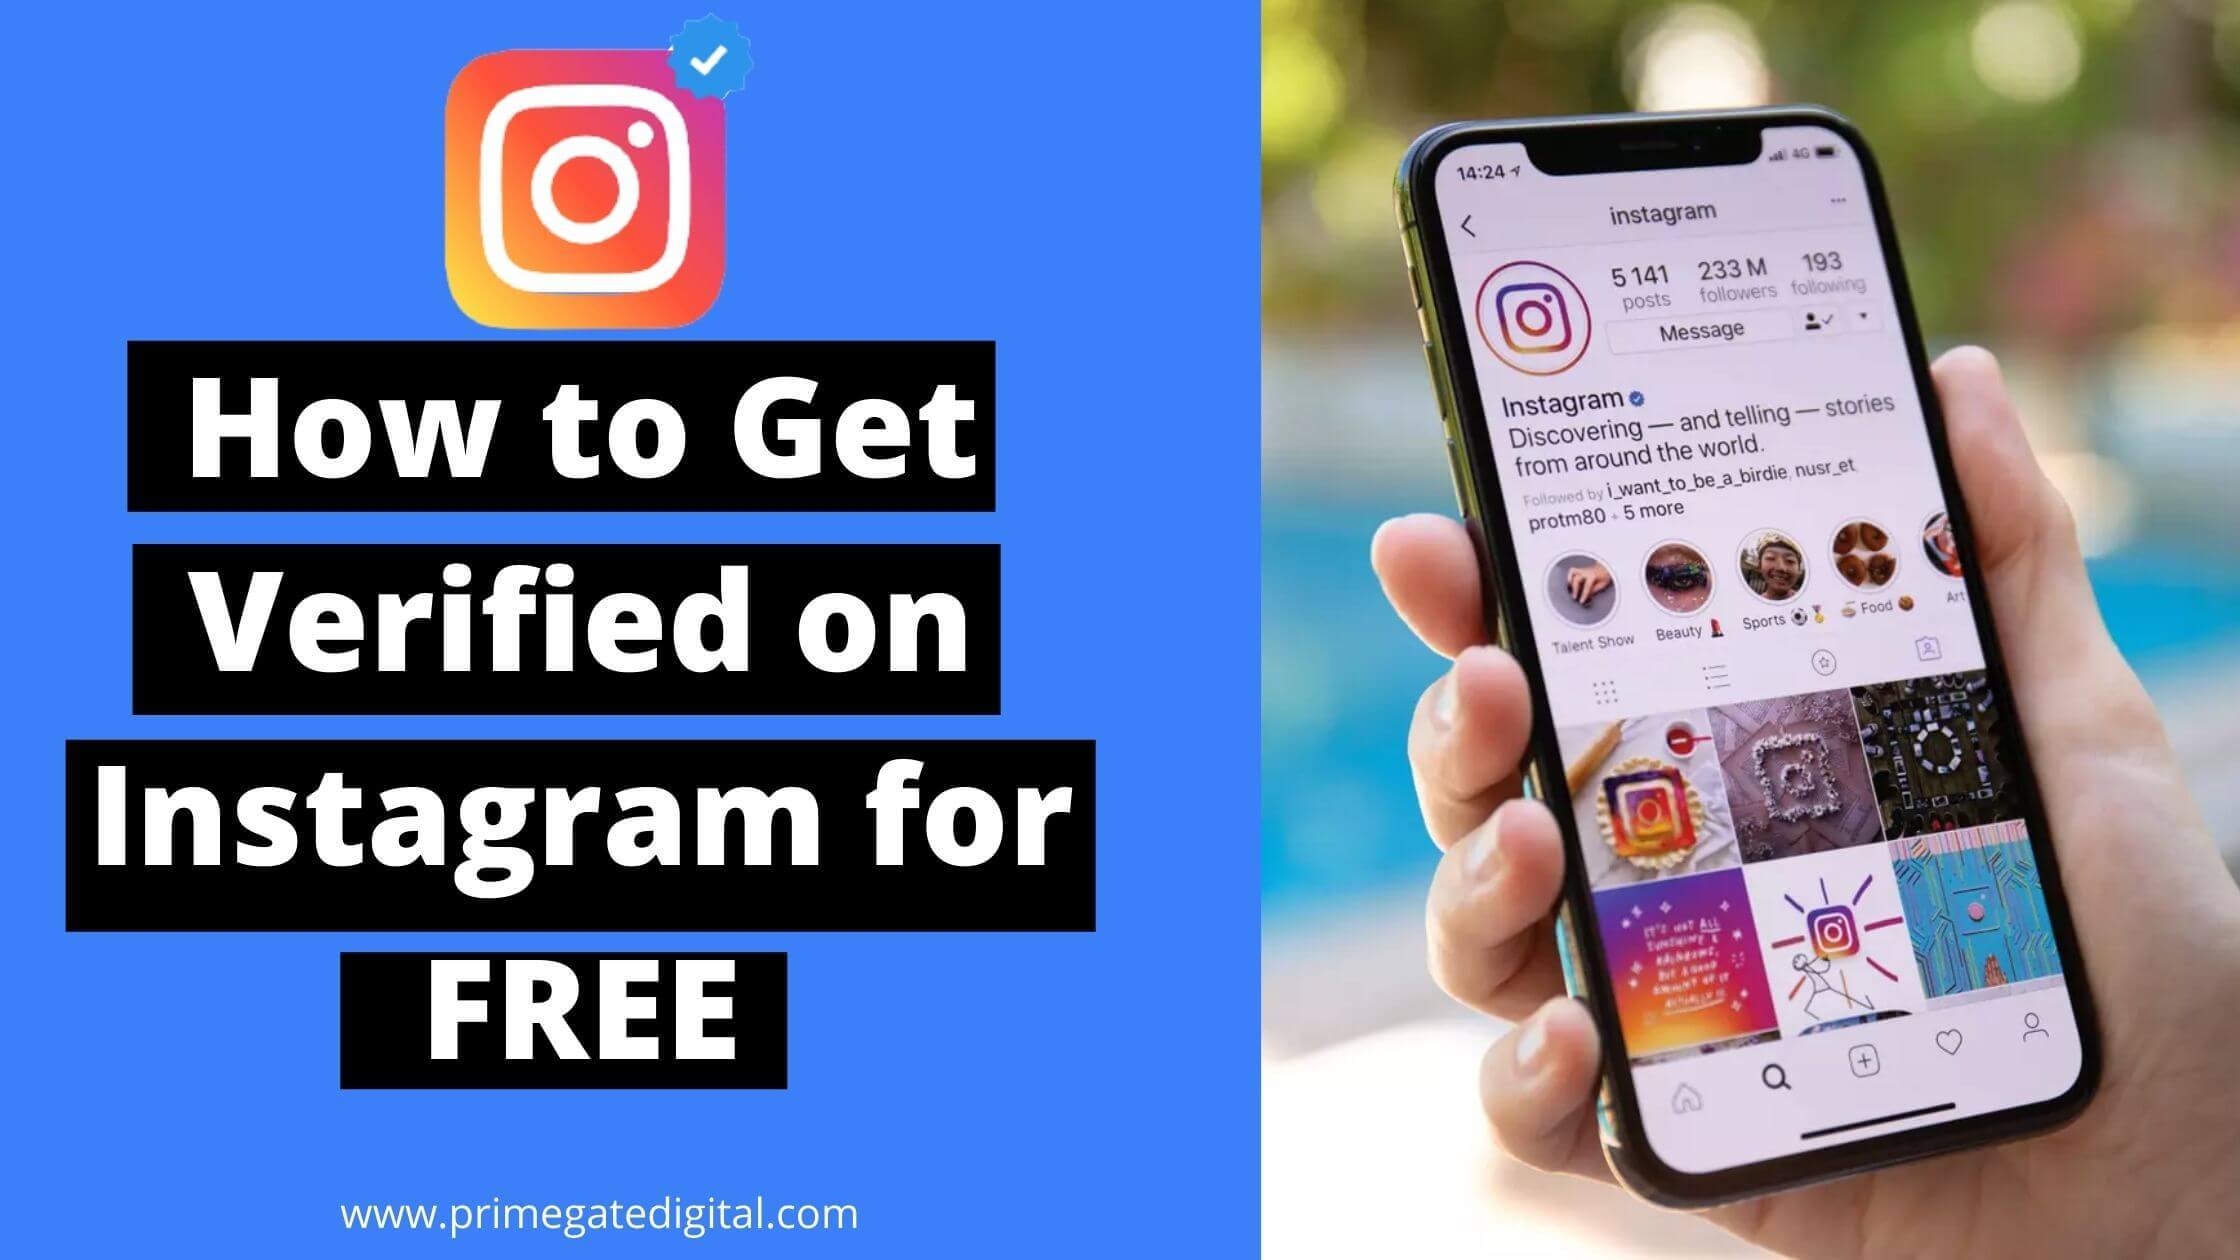 How to get verified on Instagram for free